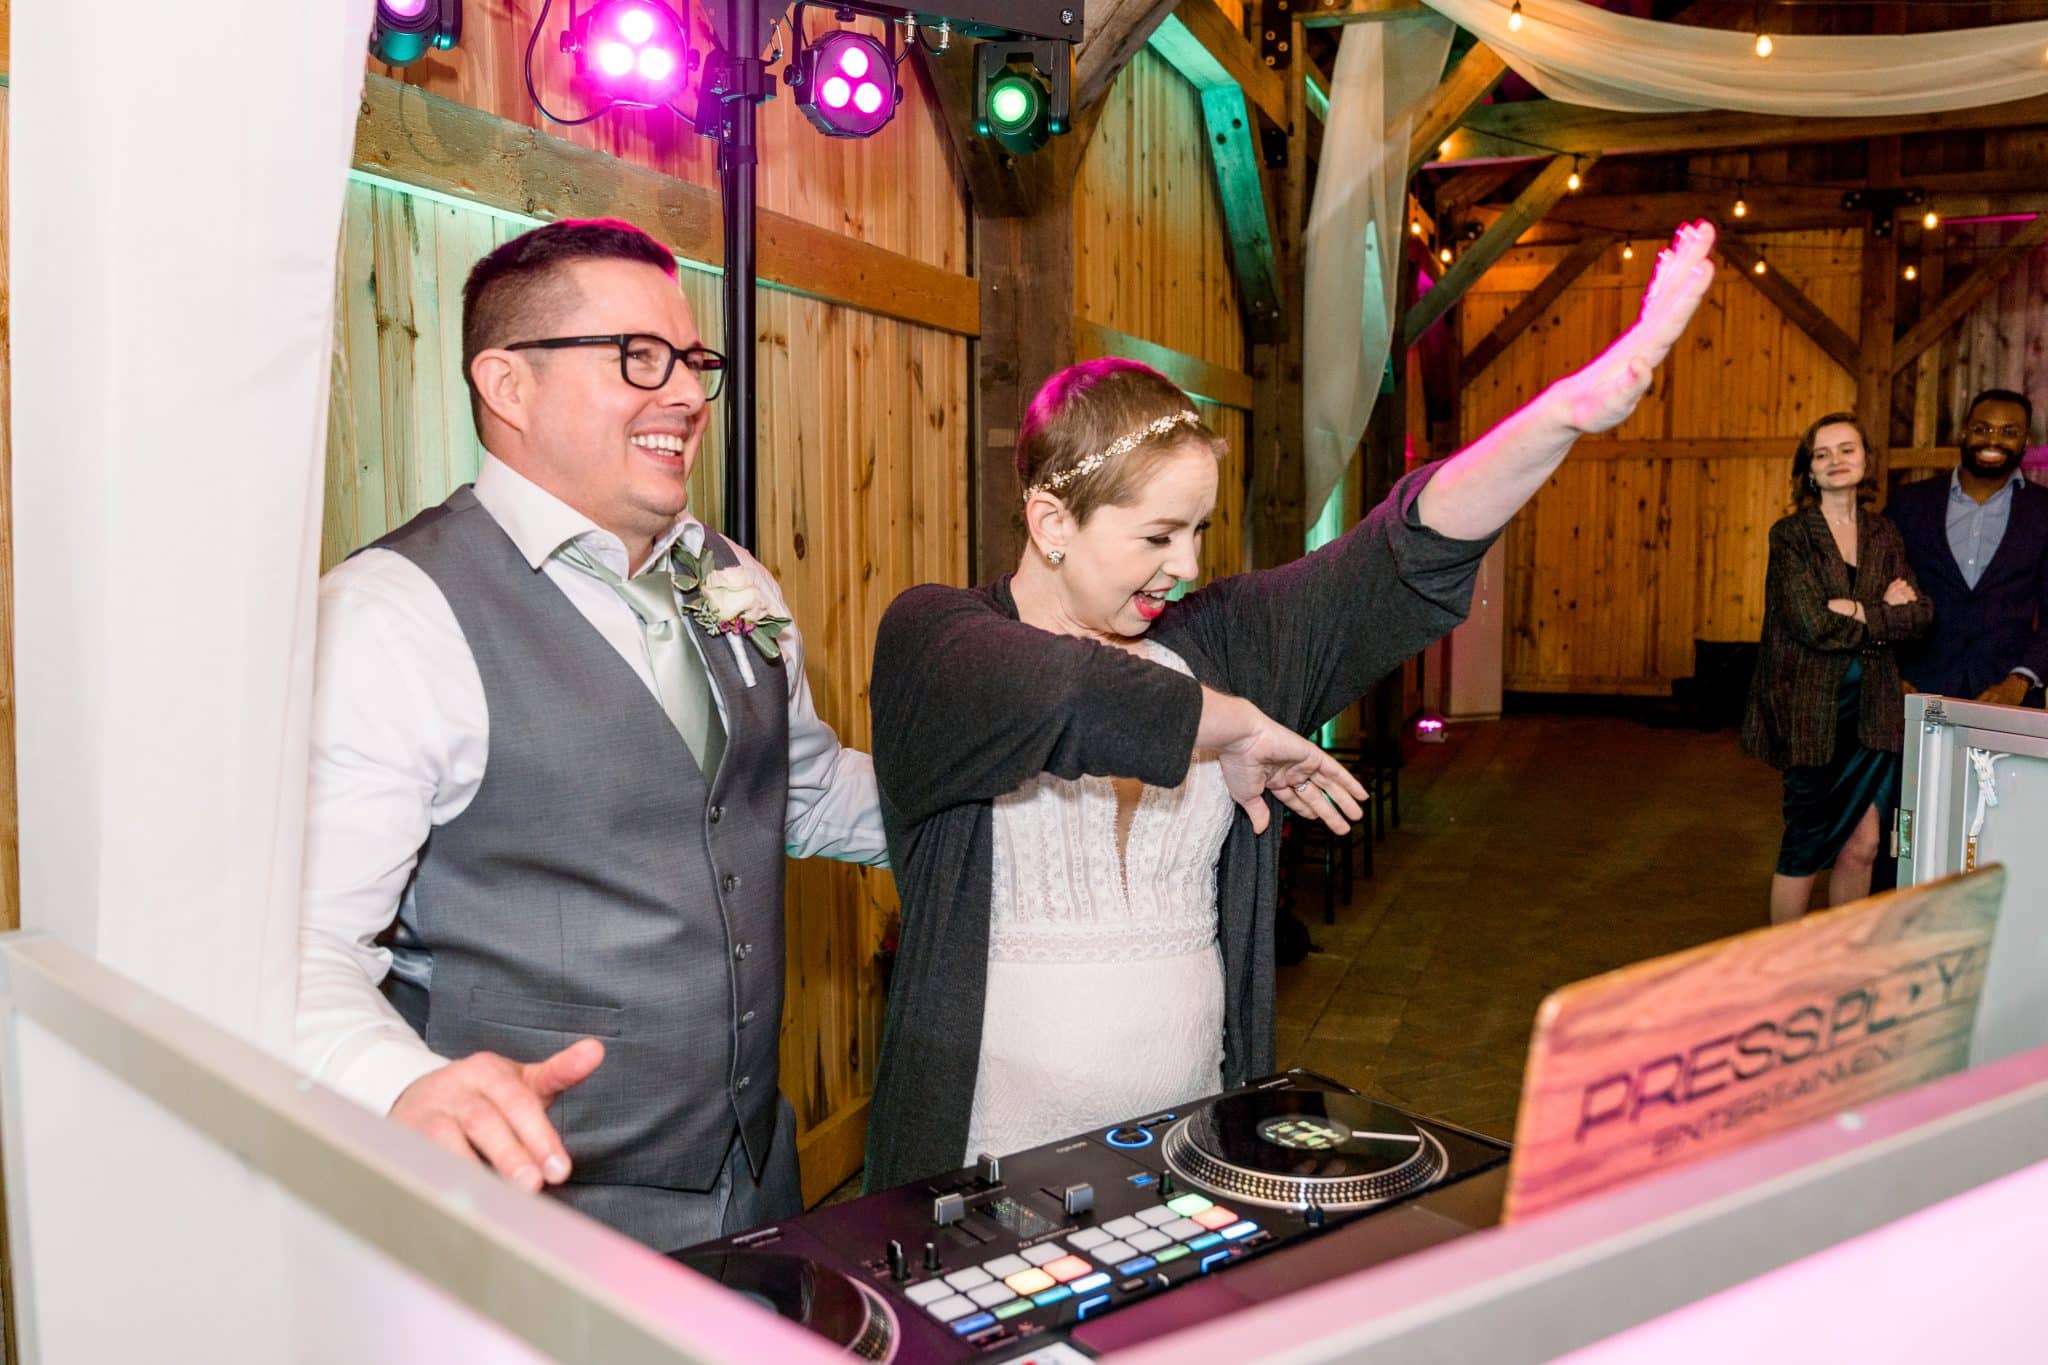 Bride and groom stand behind the DJ booth laughing and jamming out to music at their wedding vow renewal reception at Bending Branch Ranch.